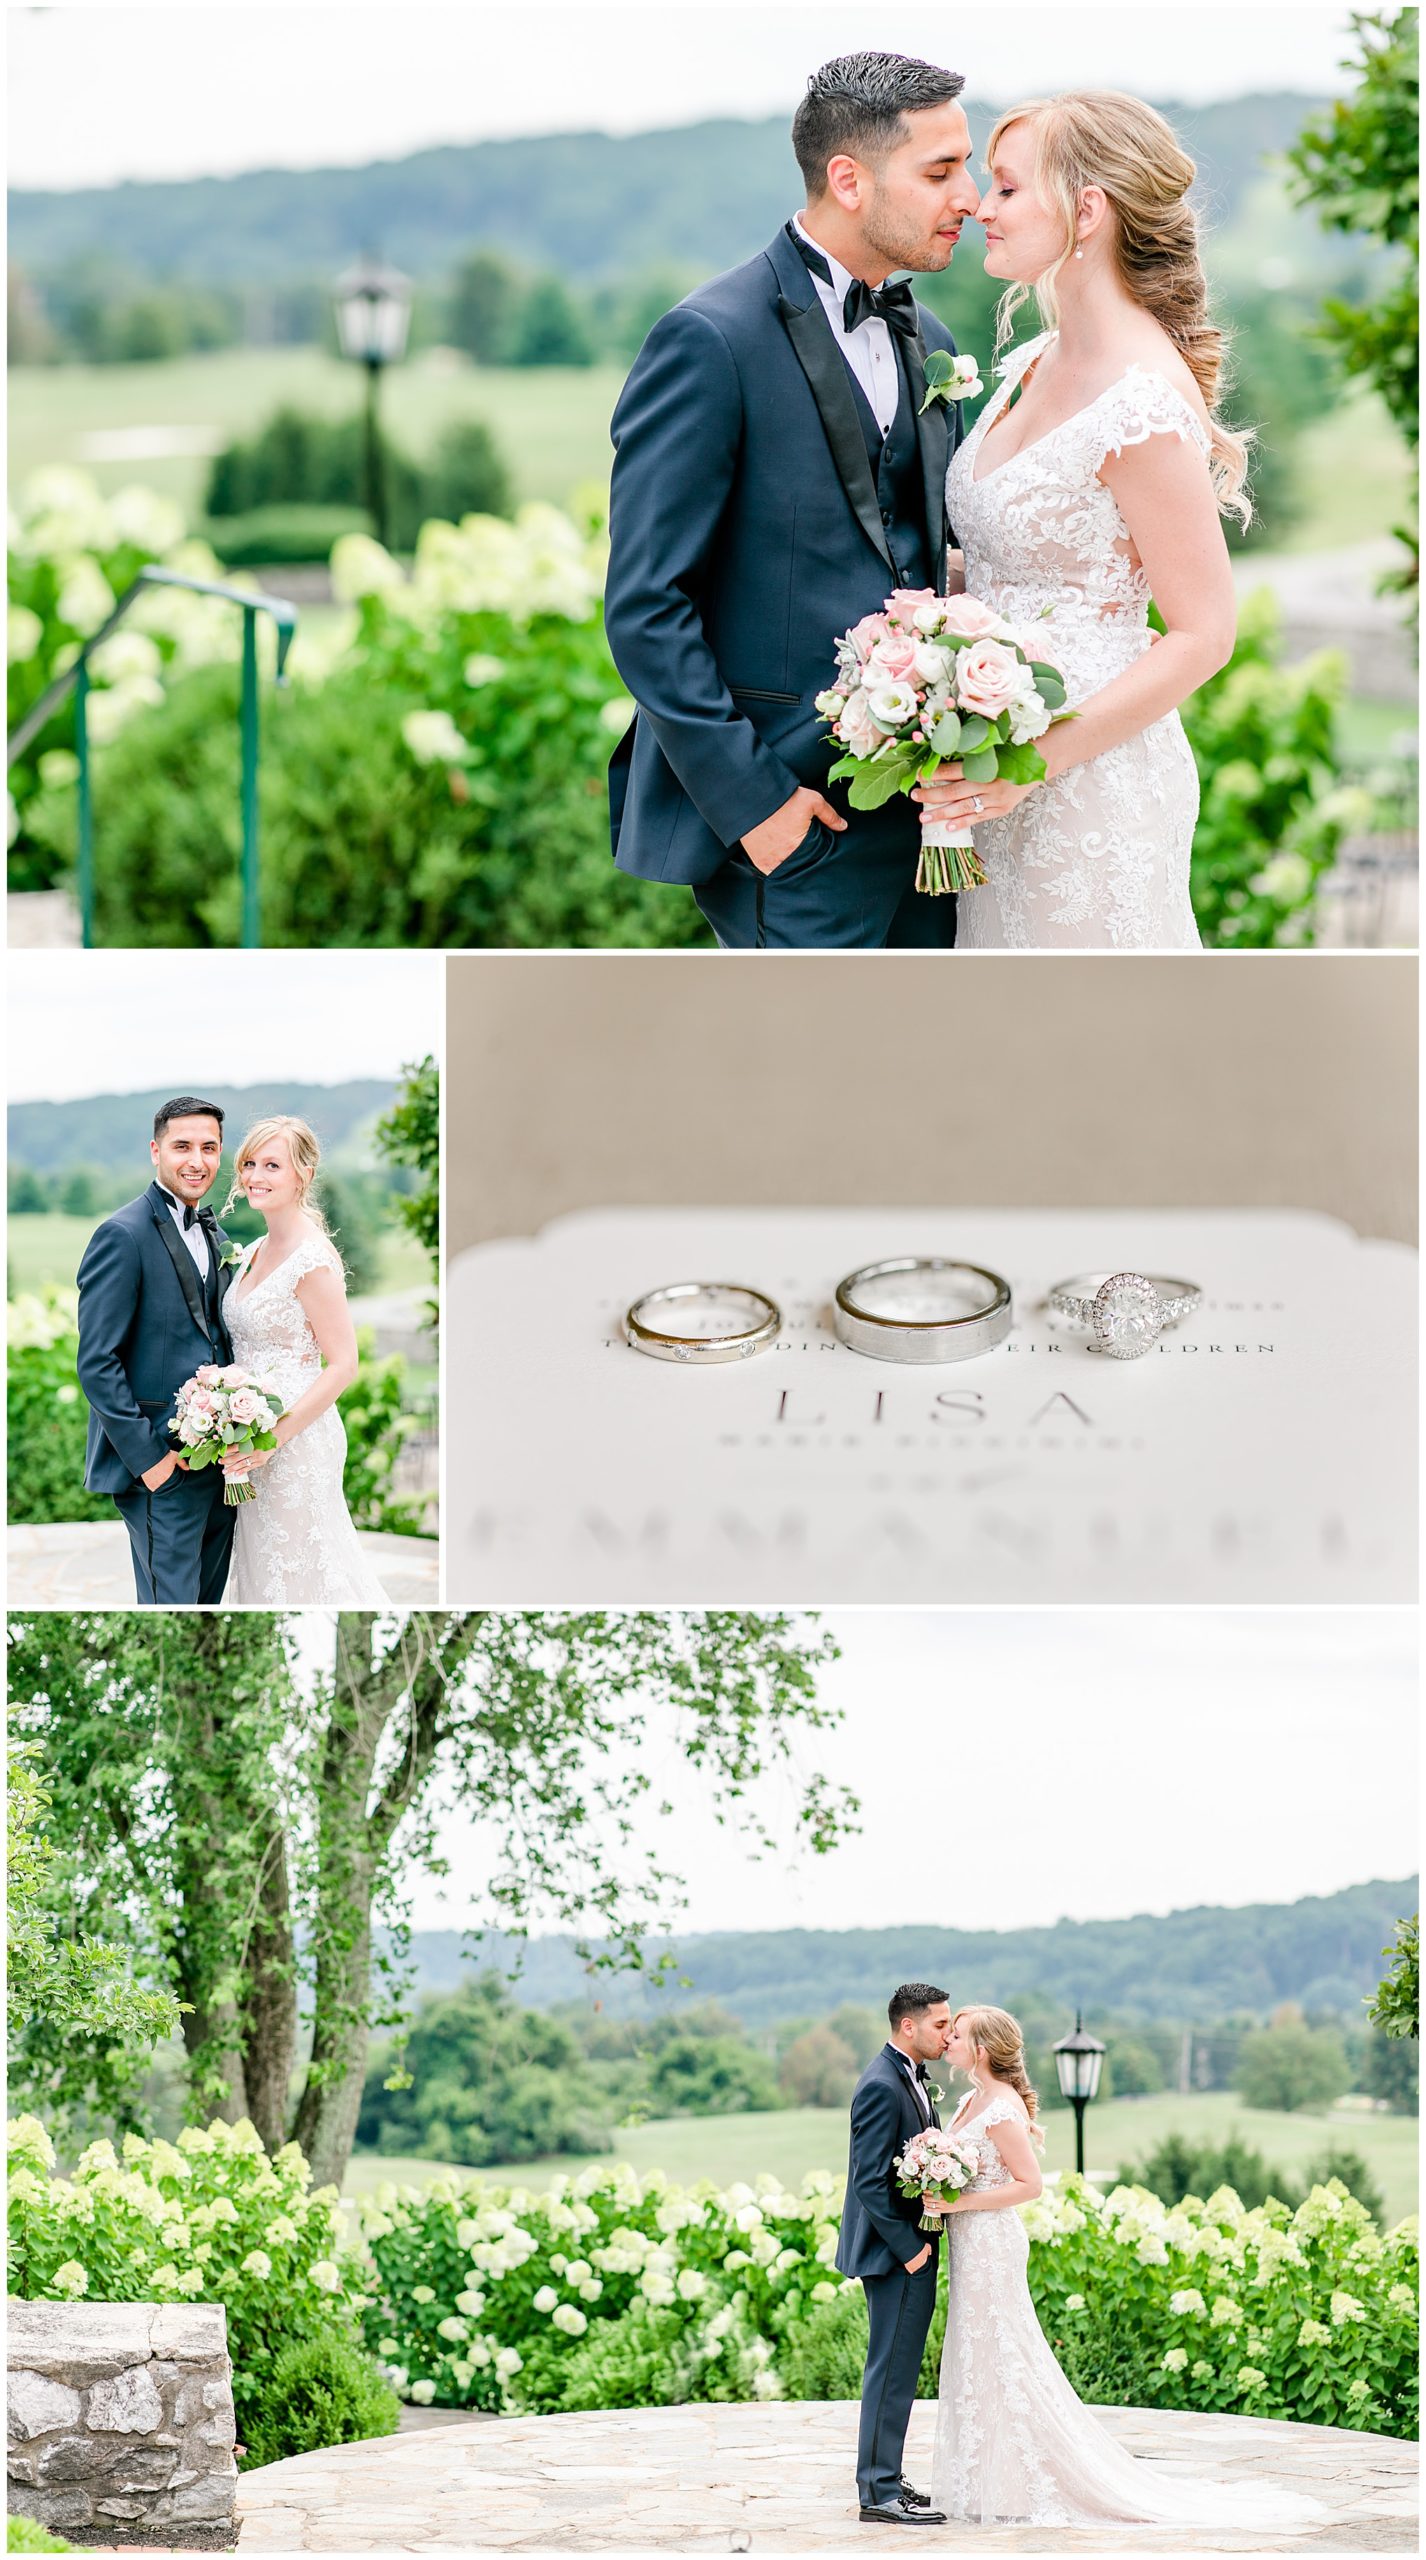 mid-summer Hayfields Country Club, Hunt Valley wedding, Baltimore wedding photographer, Rachel E.H. Photography, DC wedding photographer, summer wedding, pink and navy aesthetic, Washington DC wedding photography, Baltimore wedding photography, wedding rings, Minted wedding invitation